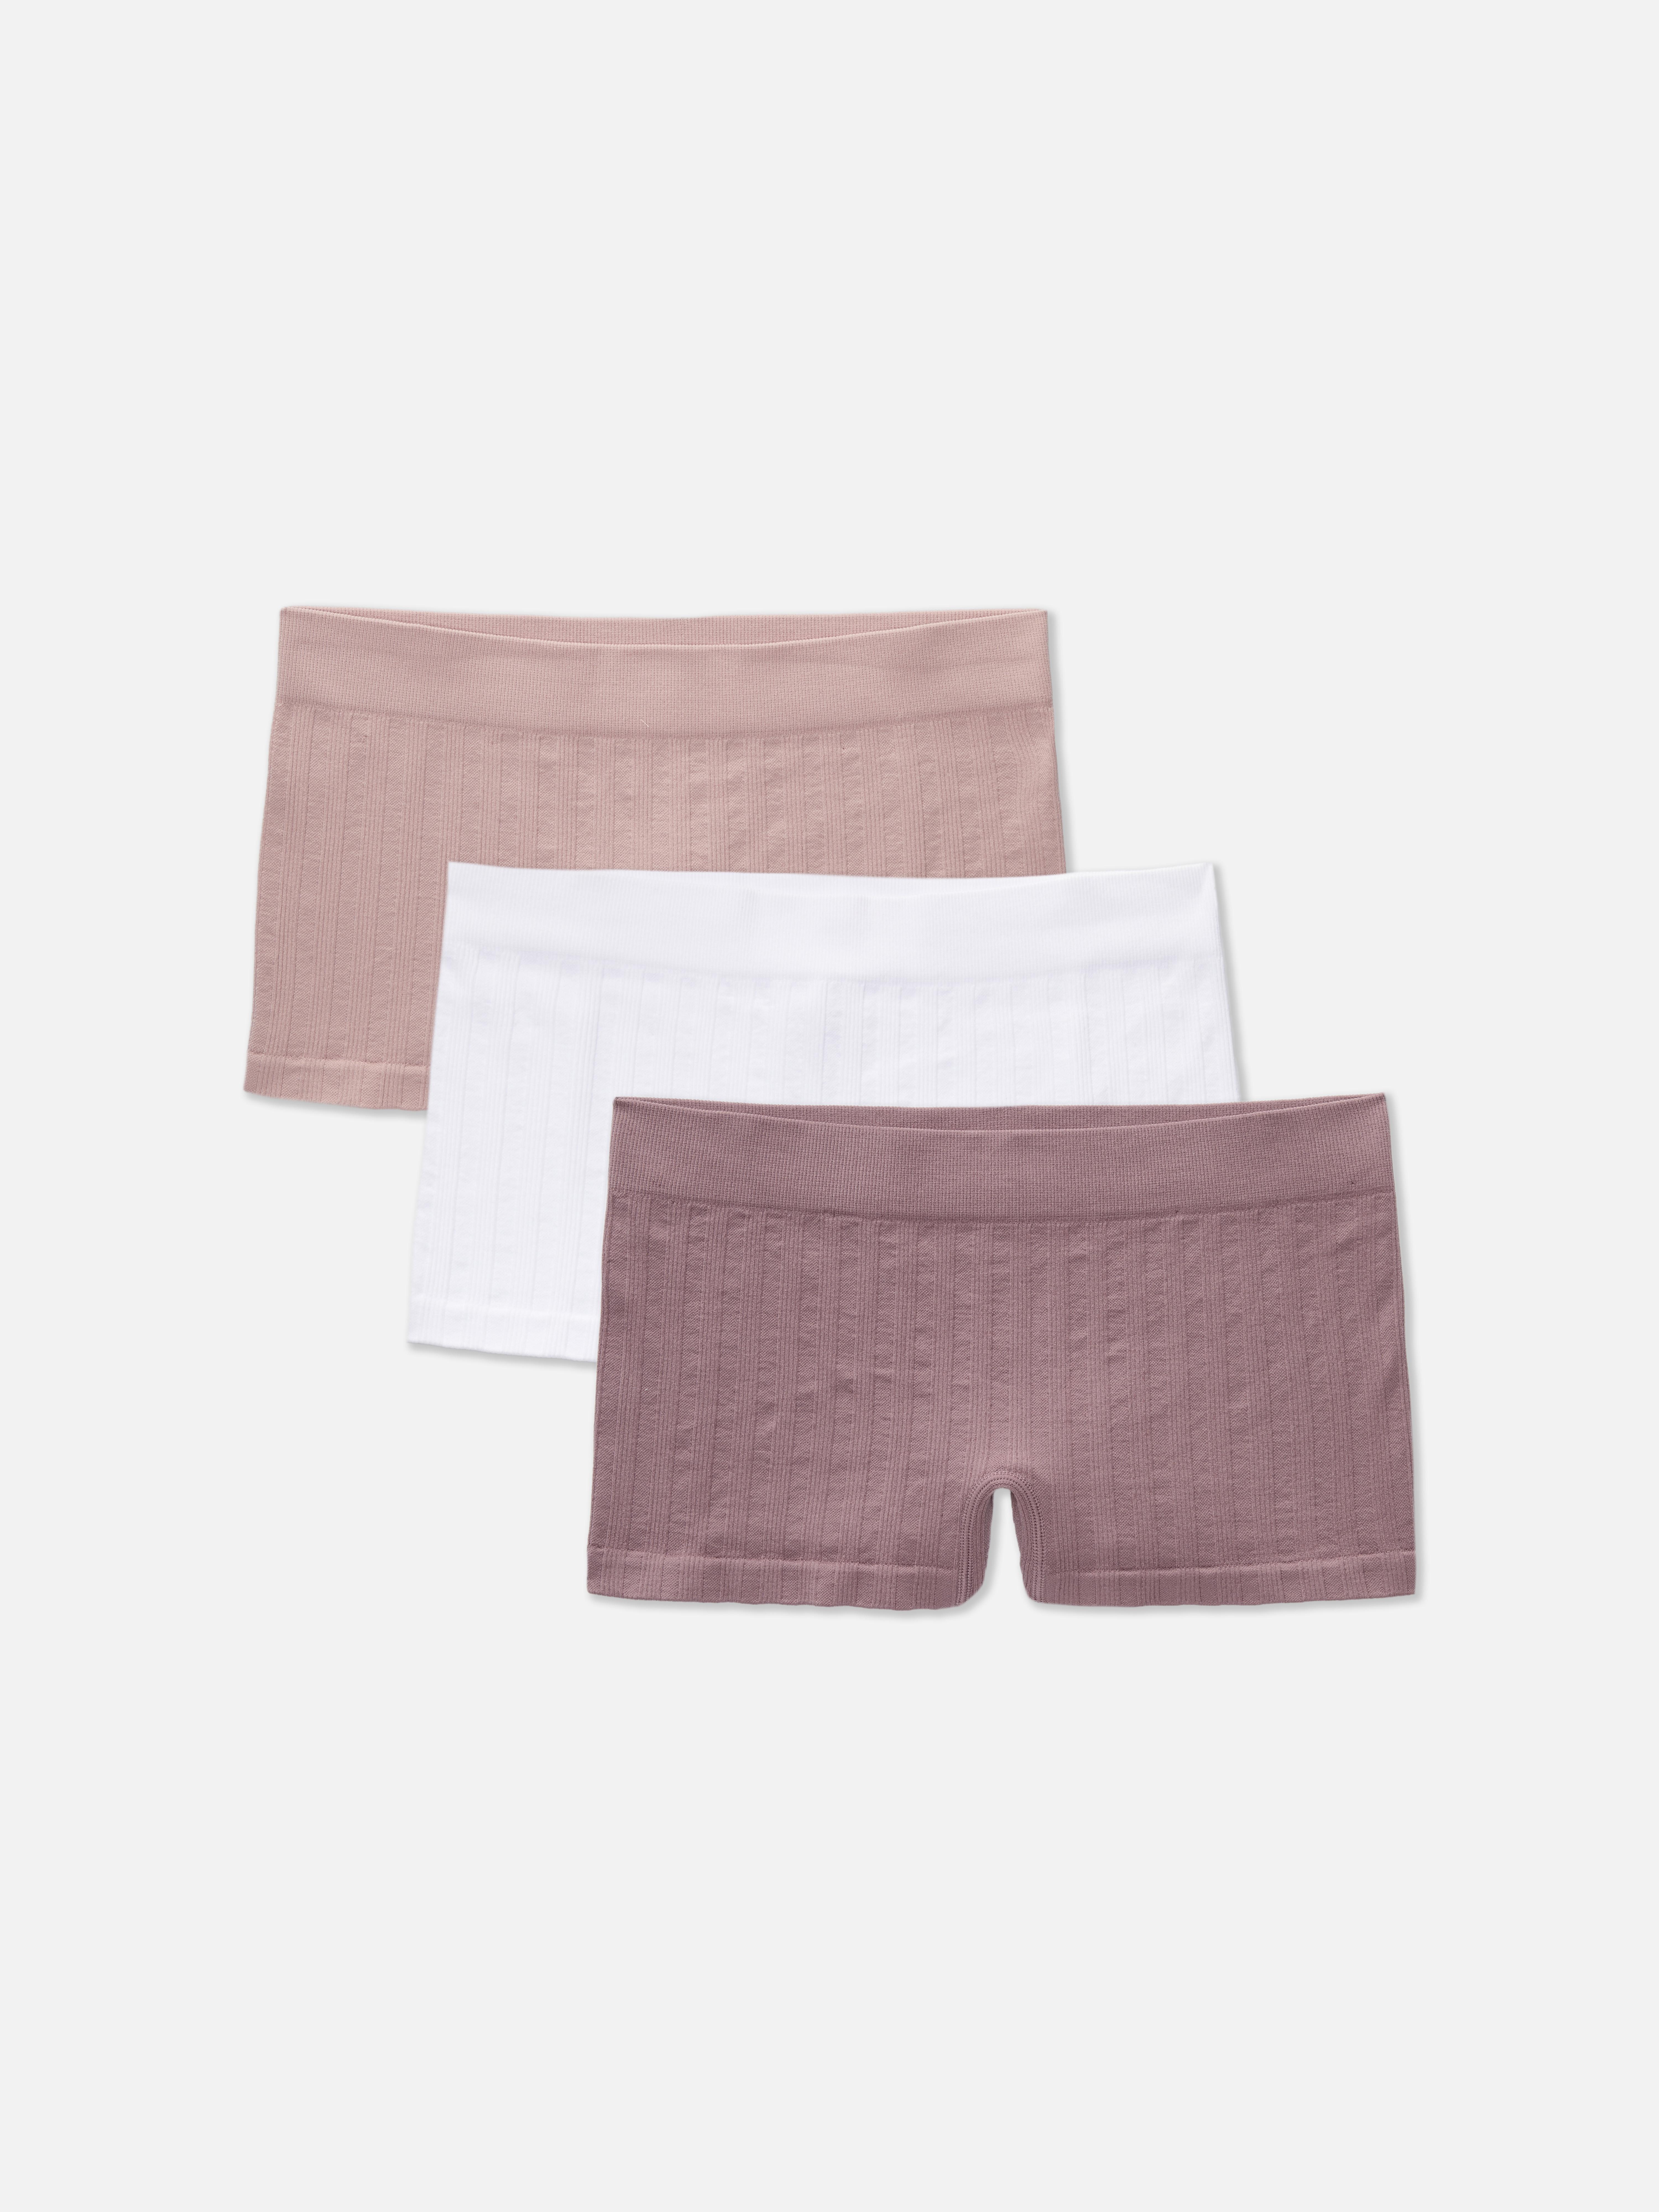 Ribbed Seamless Boxers